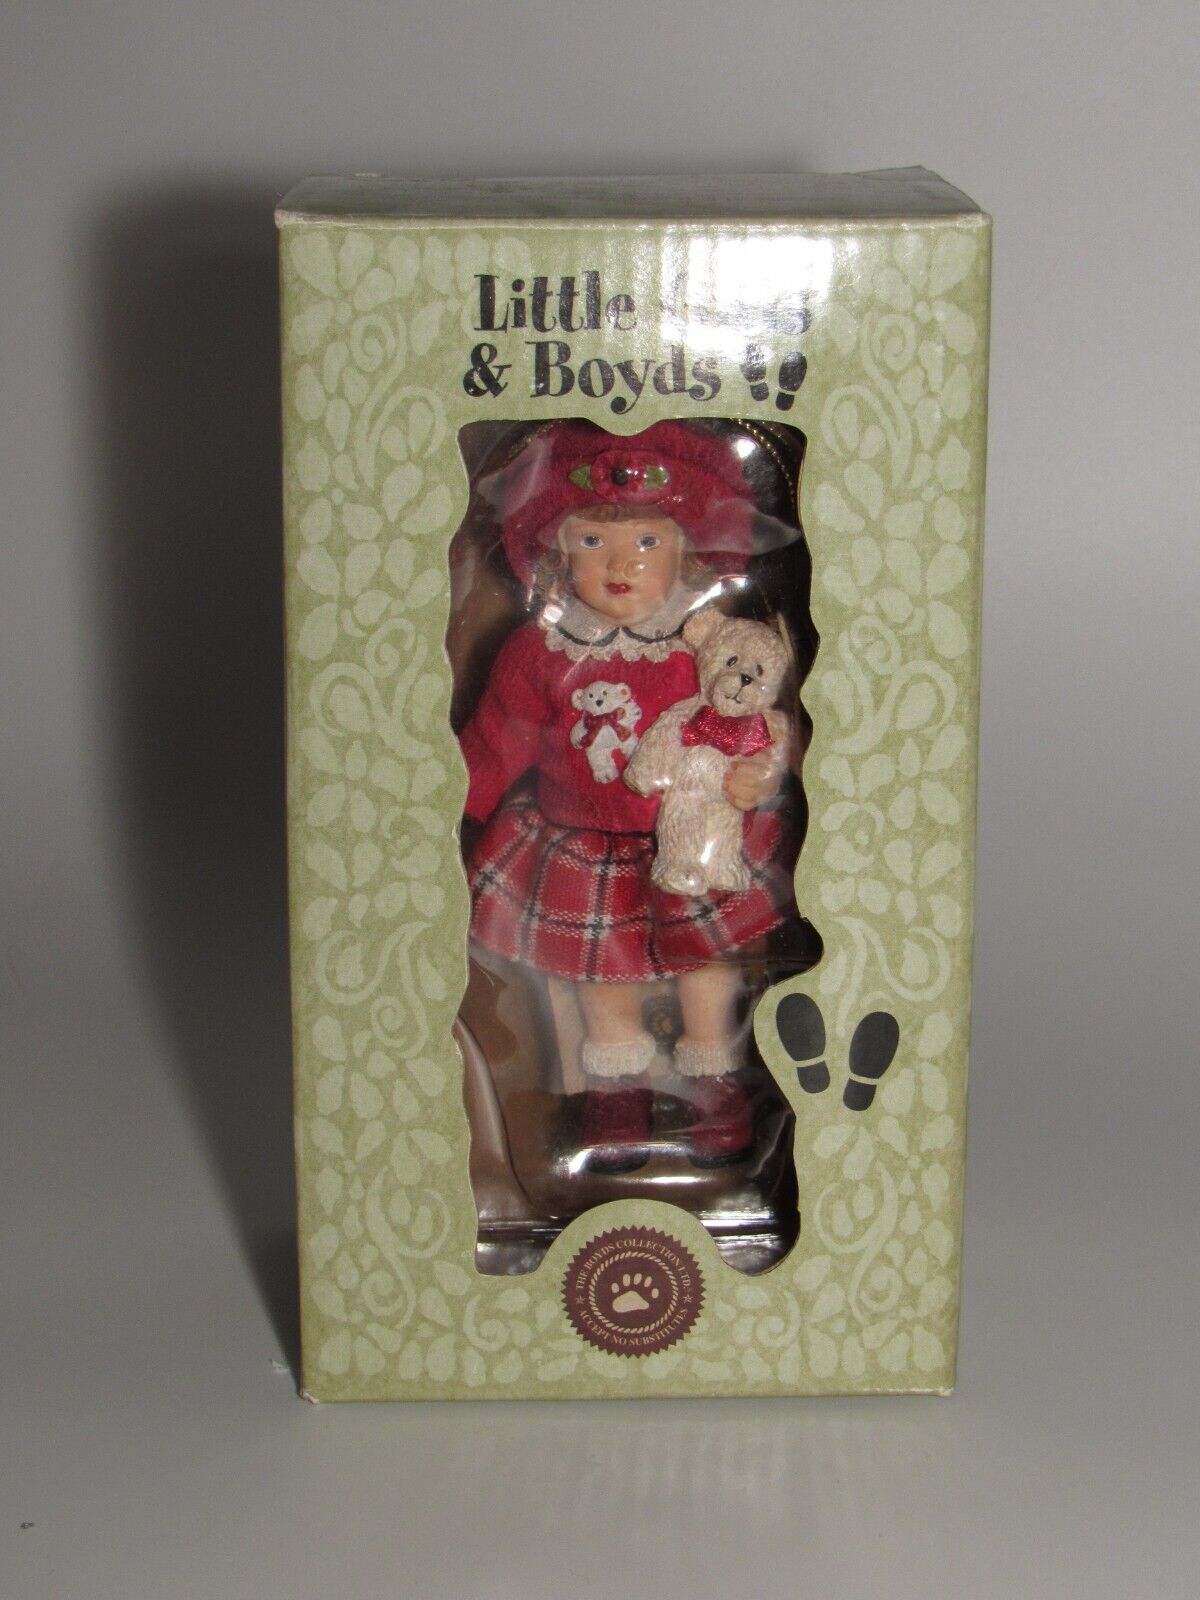 Jill With Tumbles Up The Hill Boyds Little Girls & Boyds Ornament 46001 - NIB